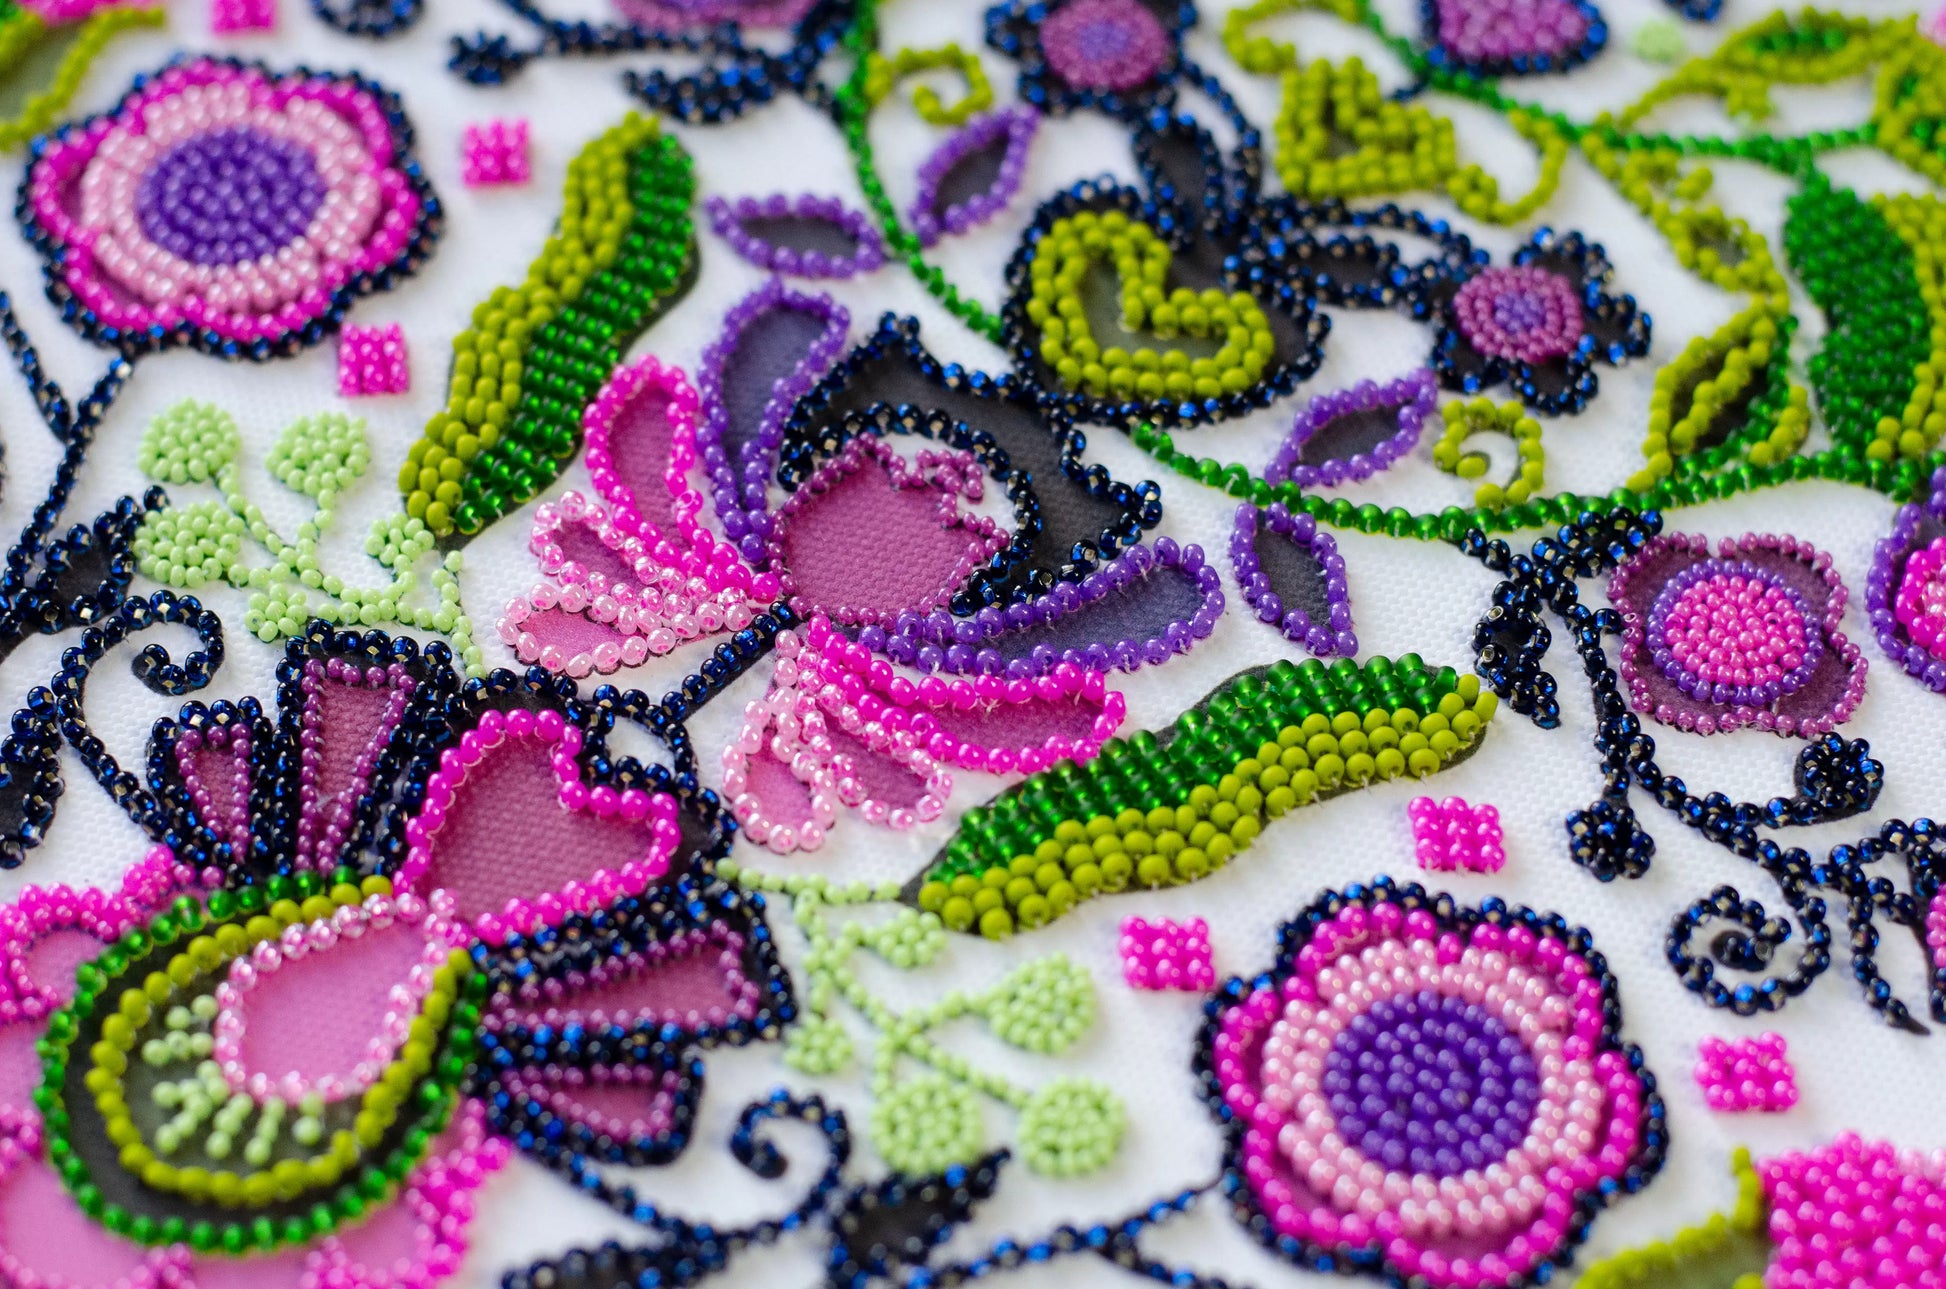 Bead embroidery kit Flowers Size: 11"×15.3" (28×39 cm)